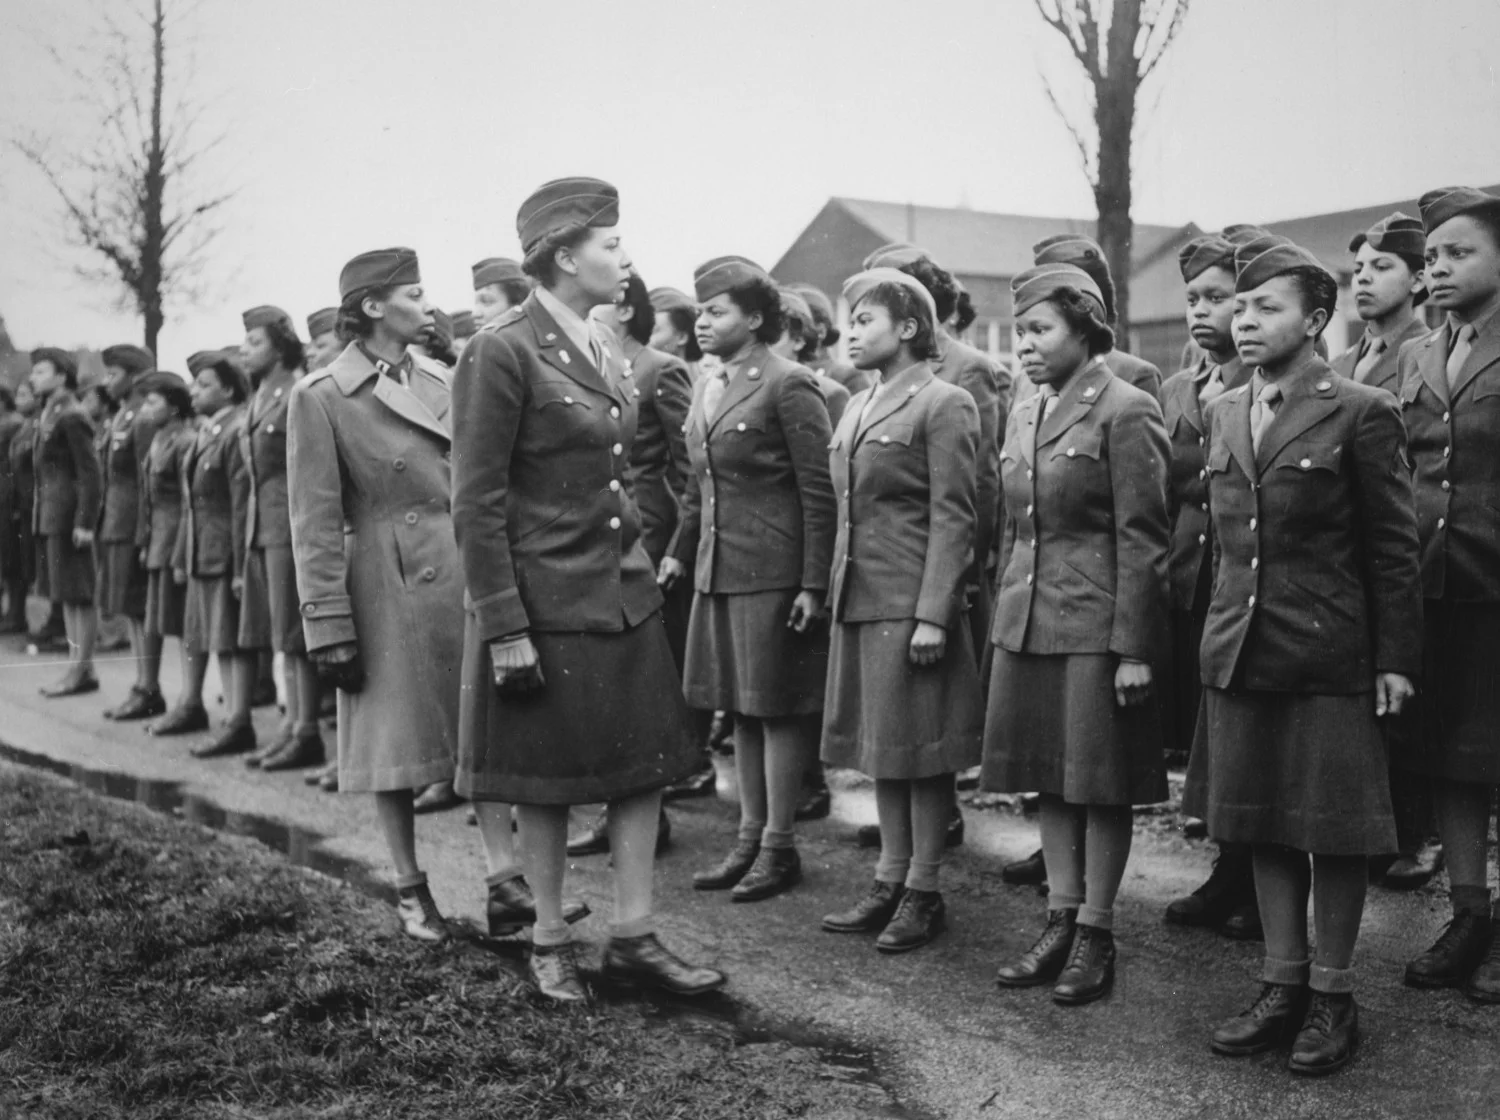 Special Exhibit on the Women of WWII